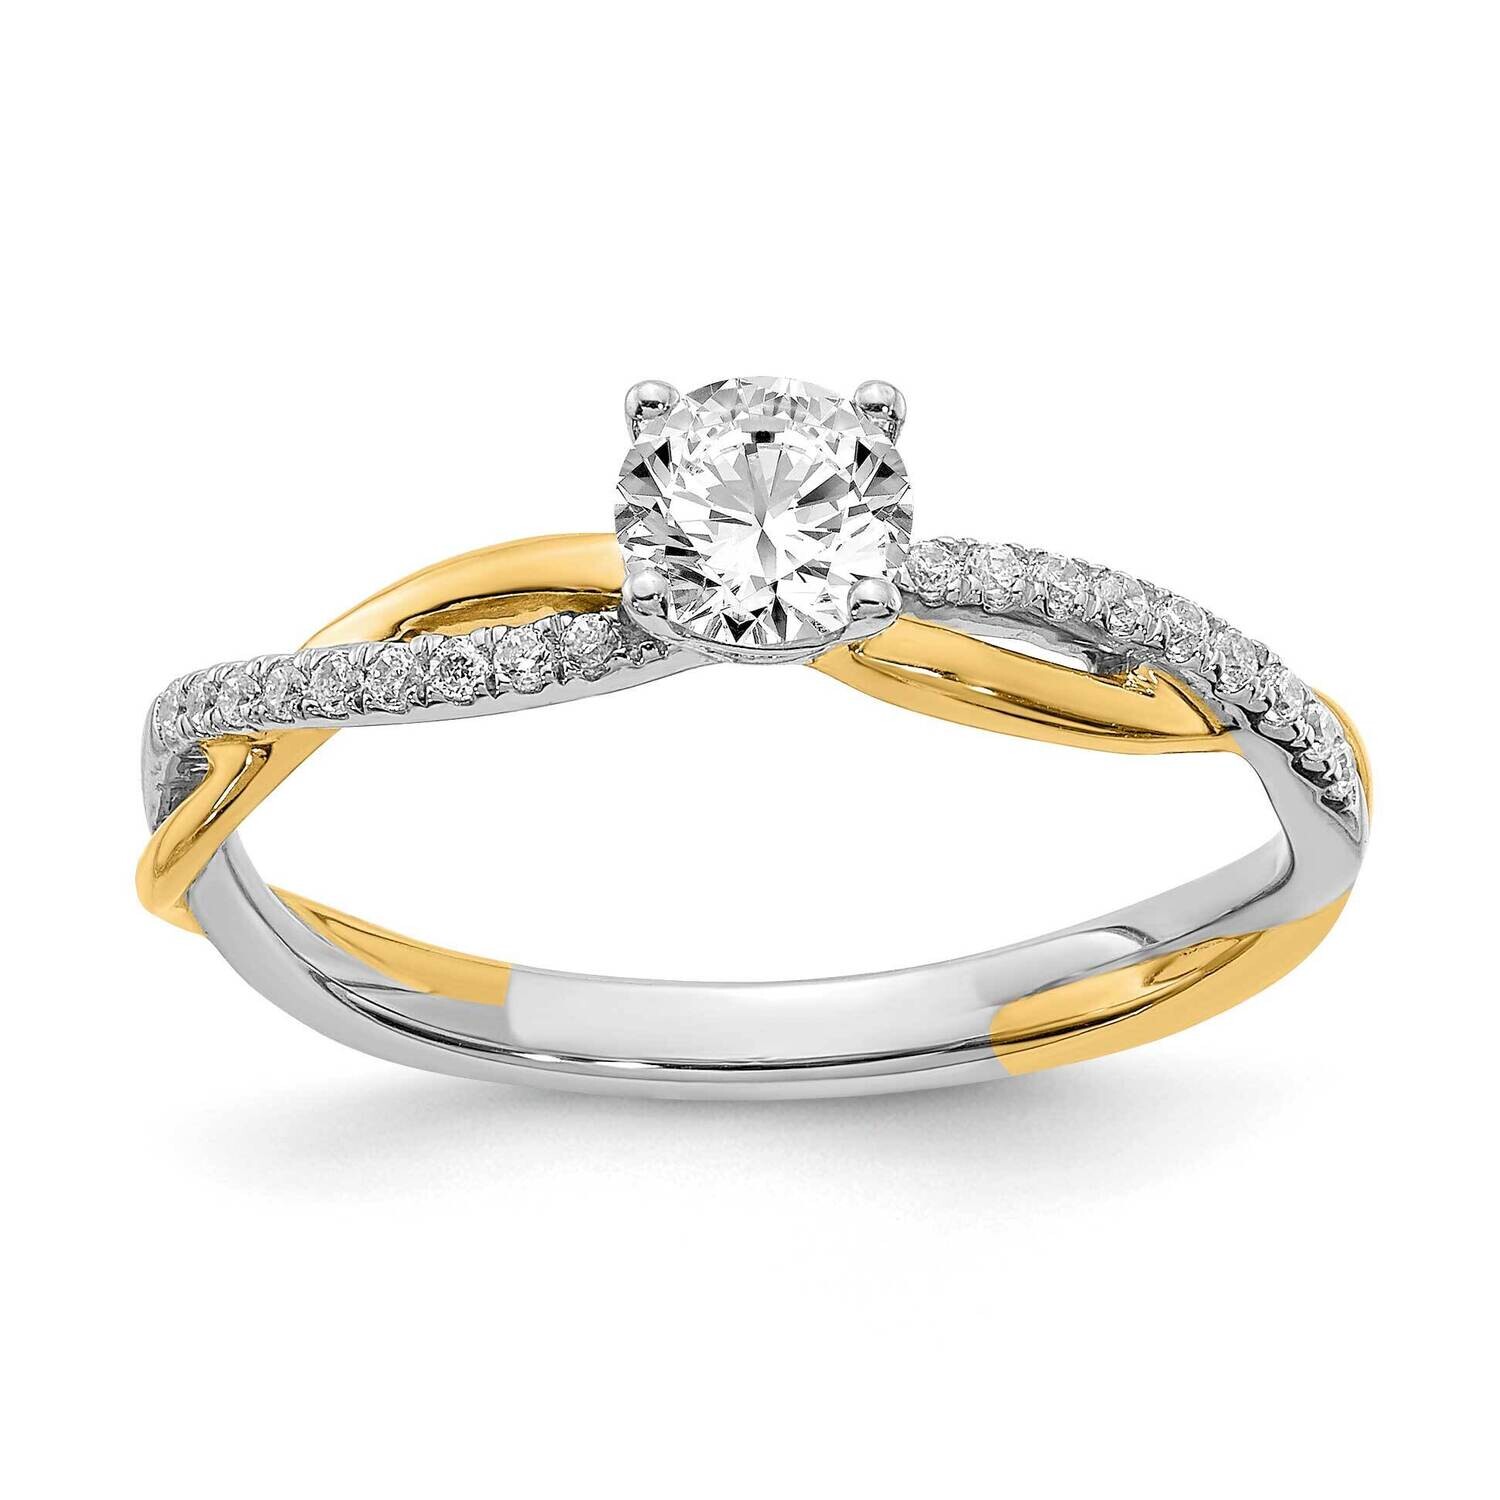 &amp; Yellow Gold Eng Ring Rd 1-.4Ct 18-200&#39;s Mel:S53 14k White Gold RM5940E-040-4WYAS53